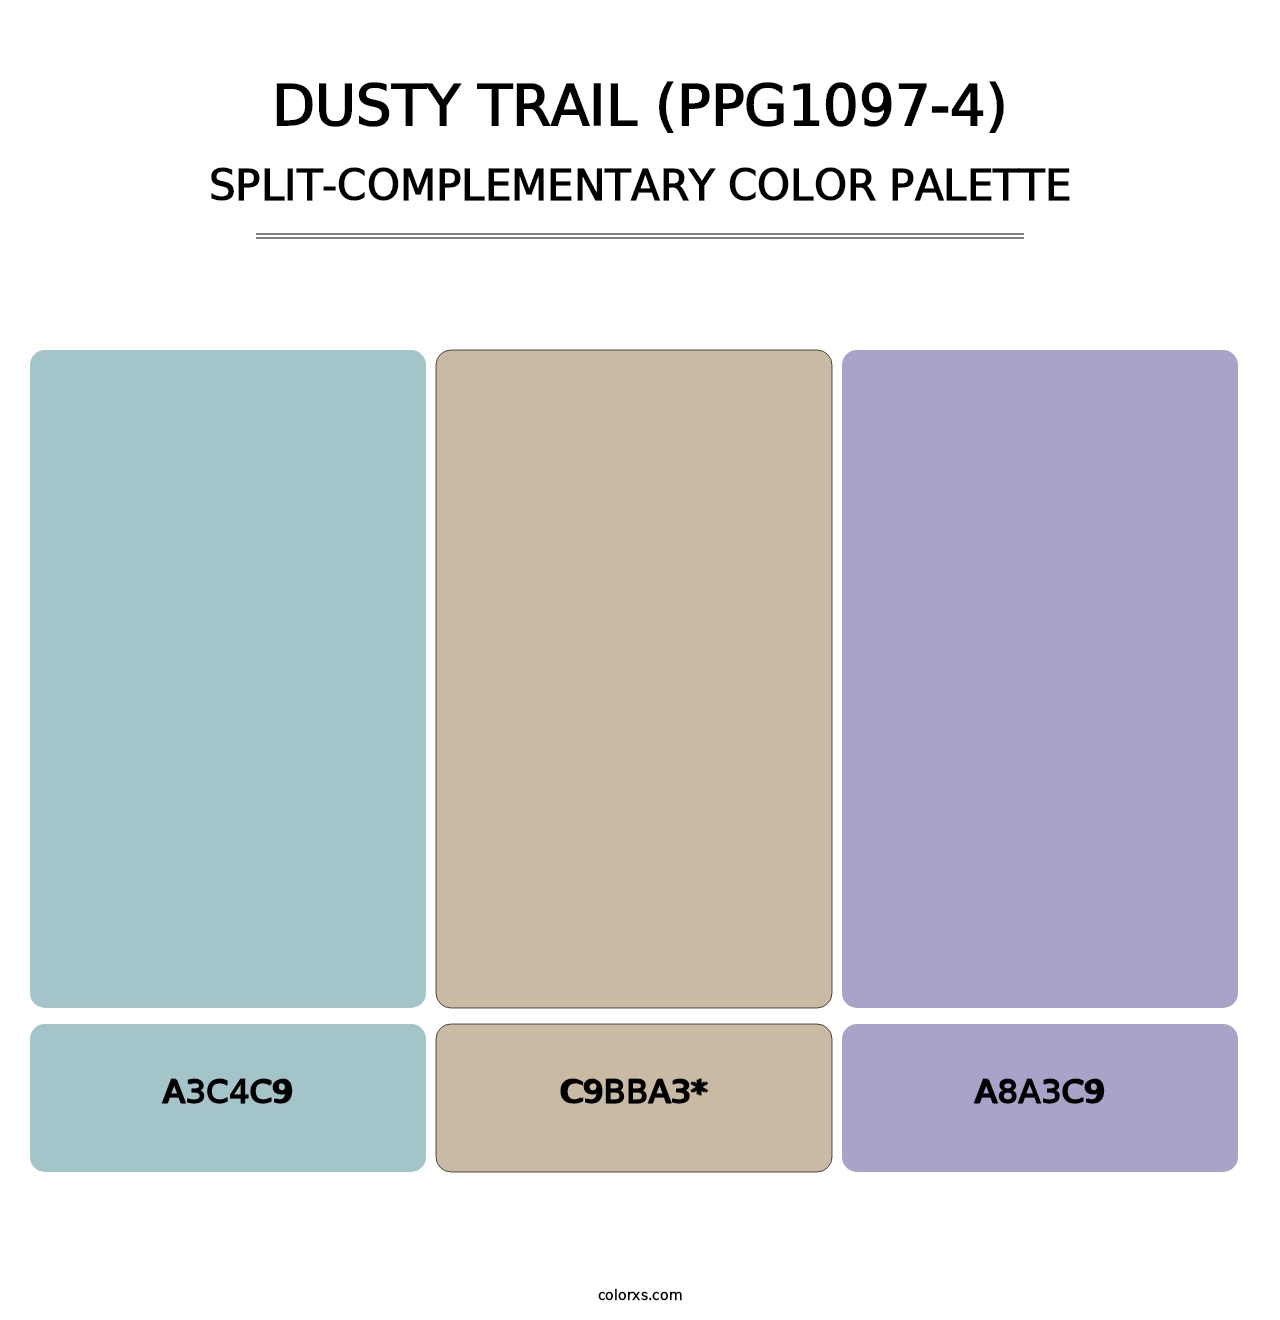 Dusty Trail (PPG1097-4) - Split-Complementary Color Palette